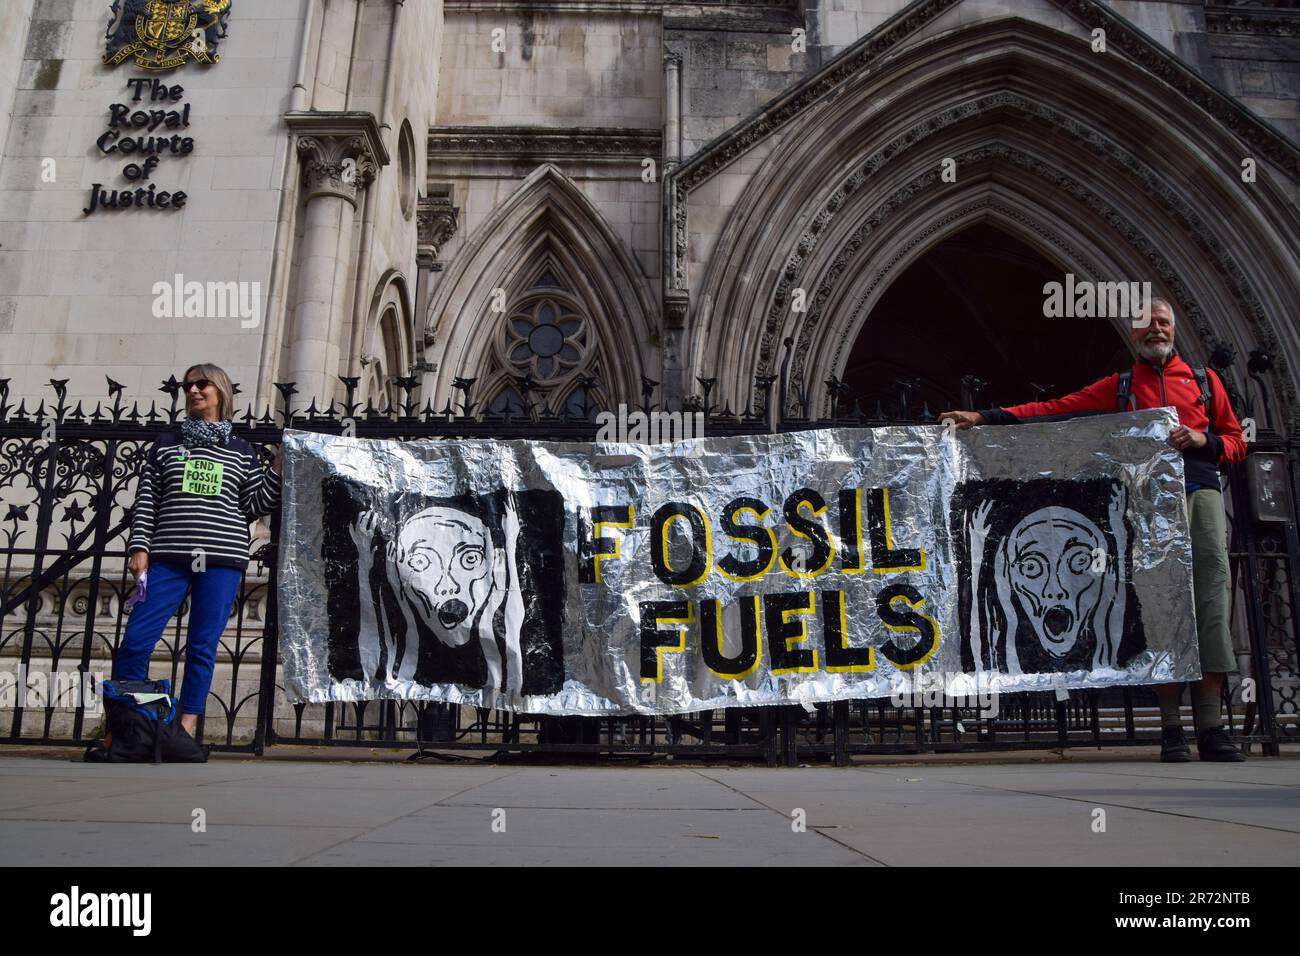 London, UK. 8th June 2023. Climate protesters gathered outside the Royal Courts of Justice during the judicial review of the planning permission for UK Oil & Gas to explore for fossil fuels near the village of Dunsfold. Stock Photo